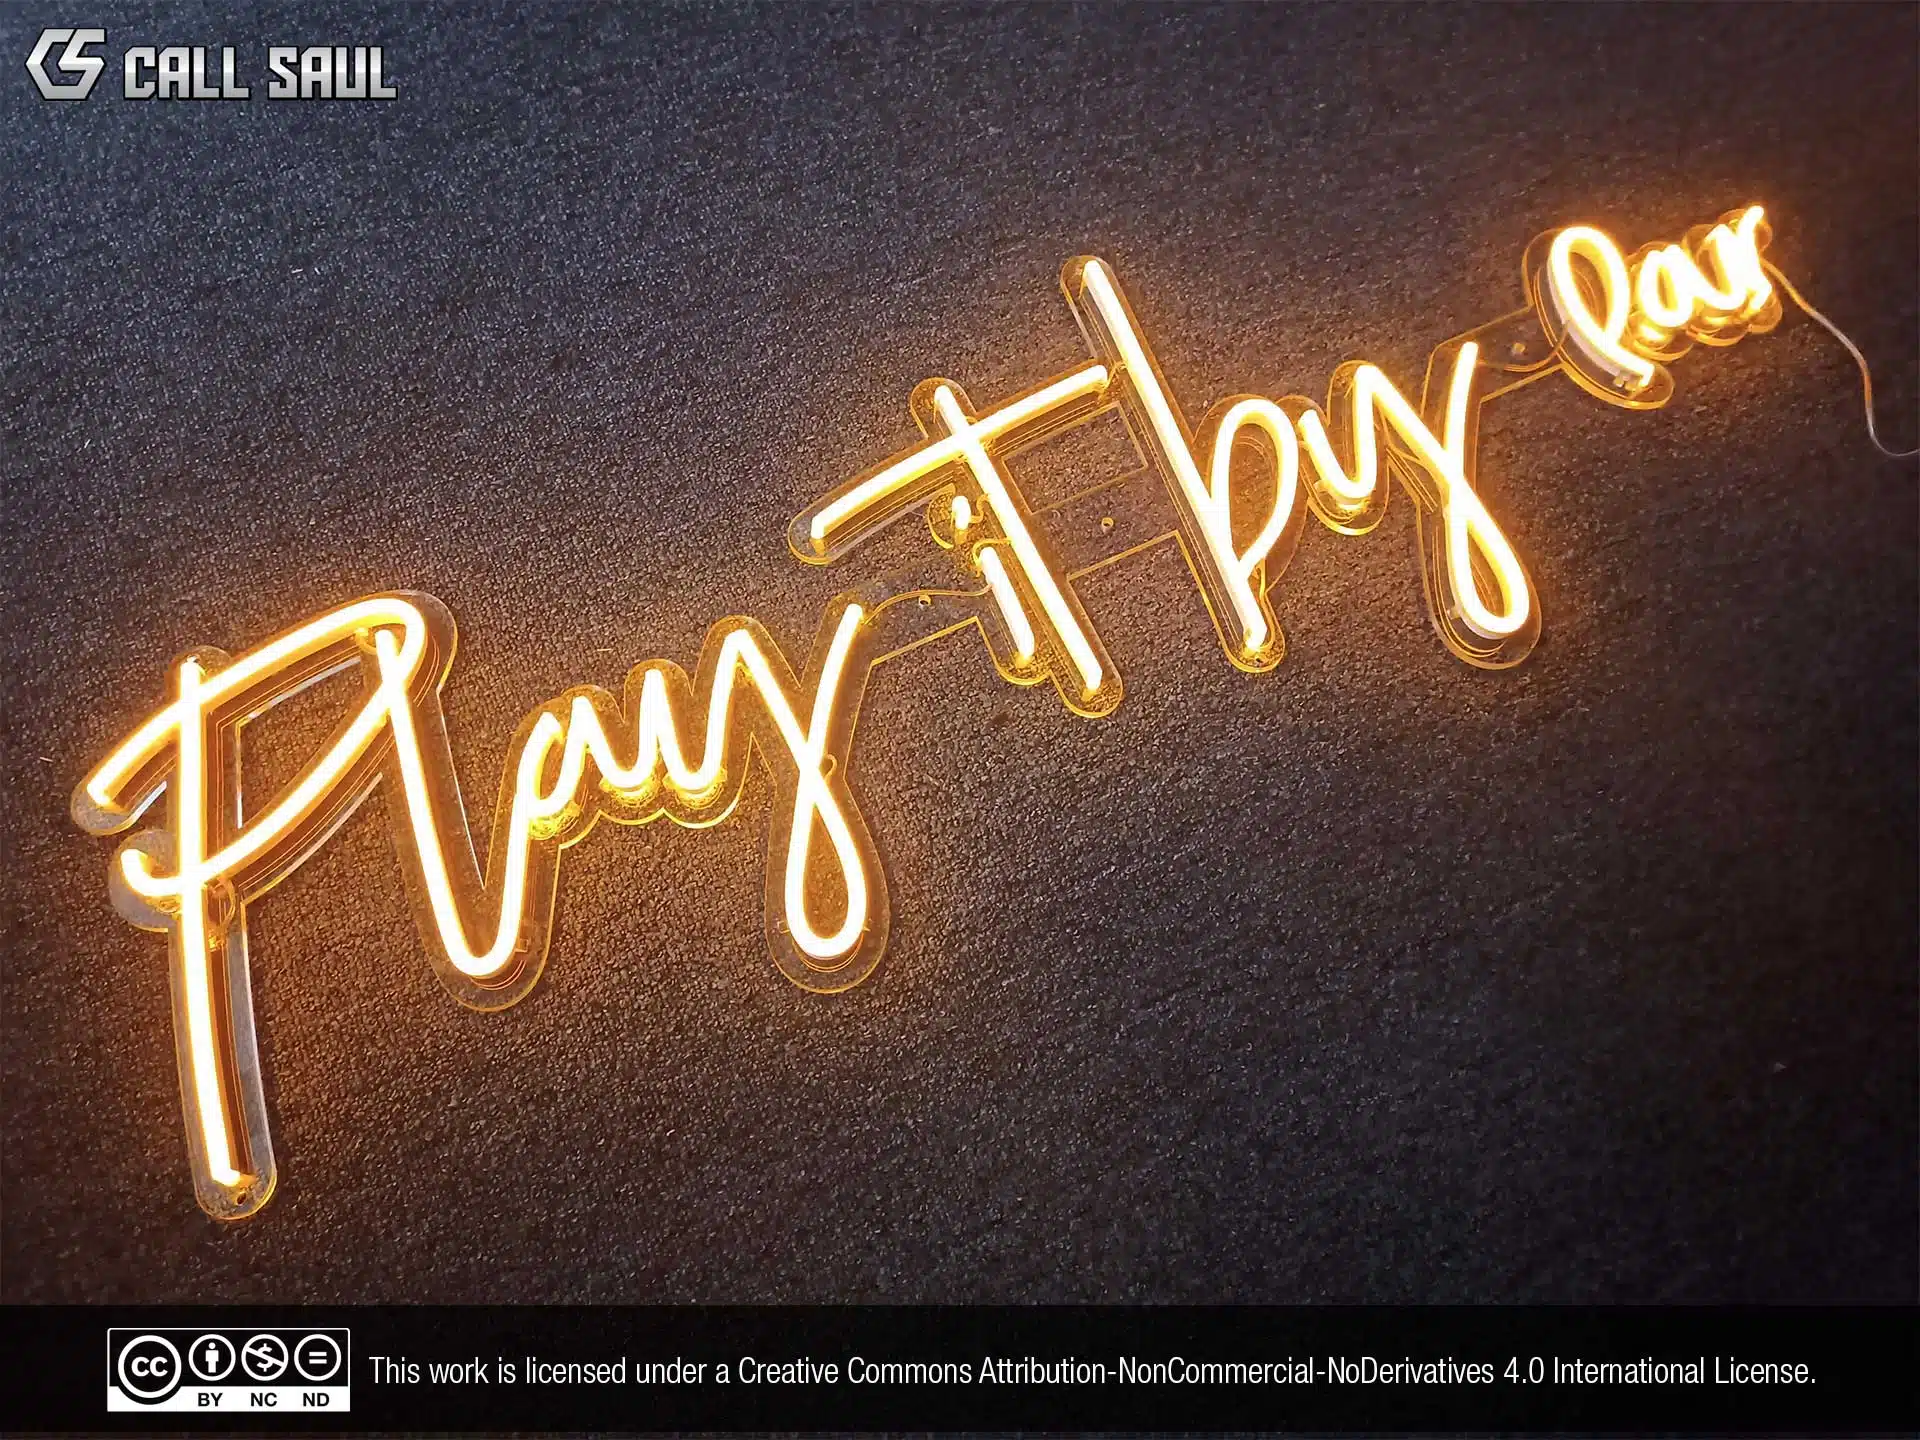 Play it by ear LED Neon Sign Golden Yellow Color